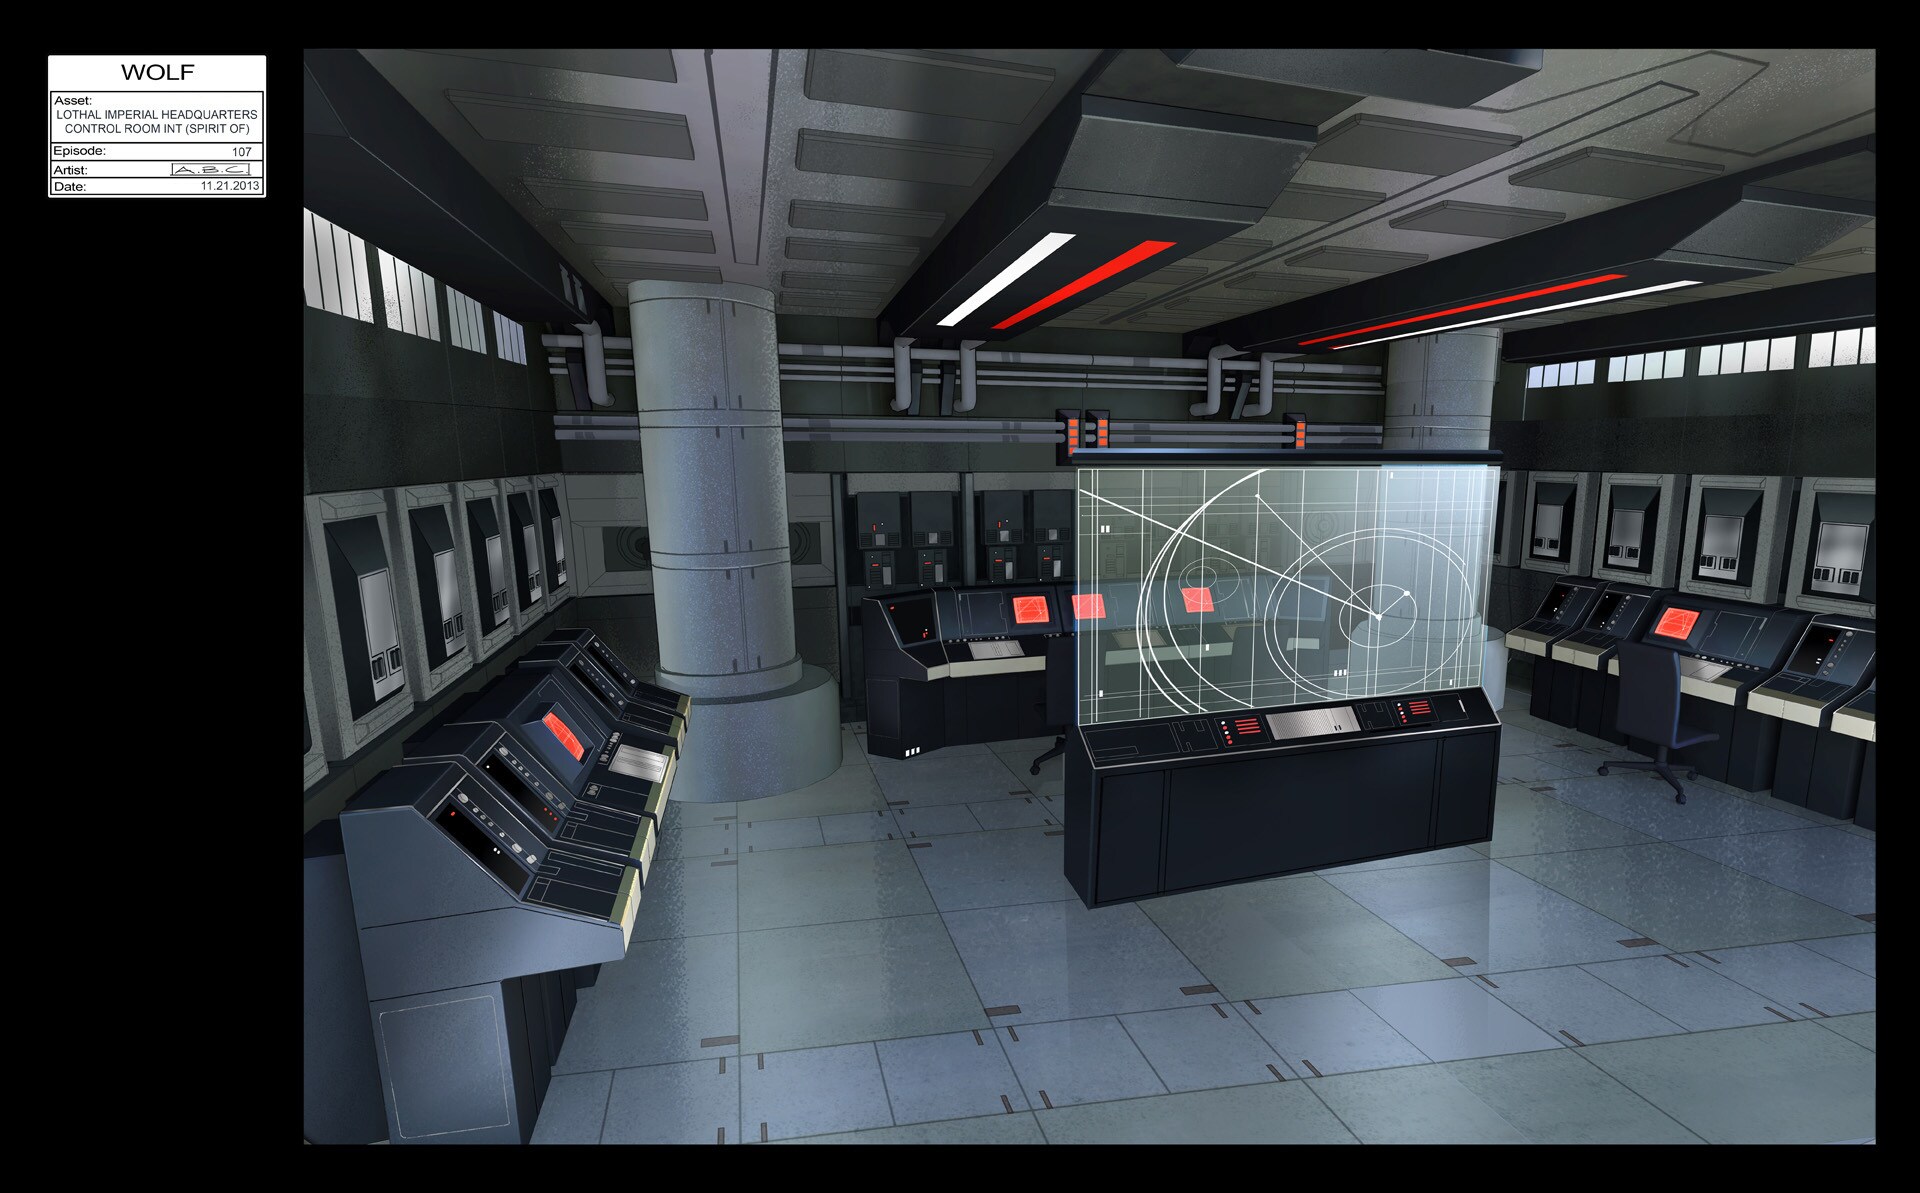 Lothal Imperial Headquarters control room interior illustration by Amy Beth Christenson.